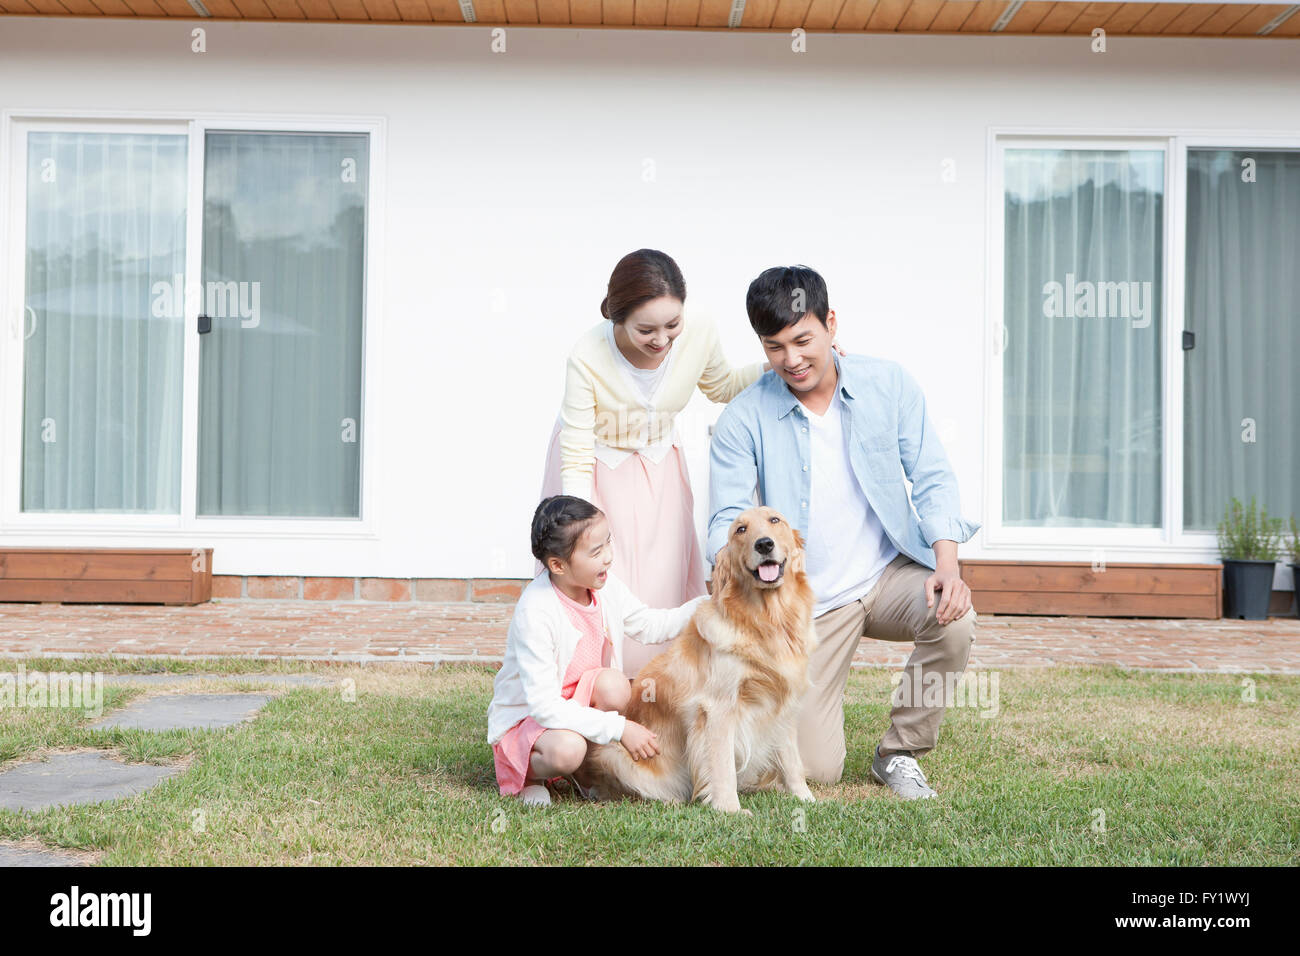 Family at the yard of their house representing rural life Stock Photo